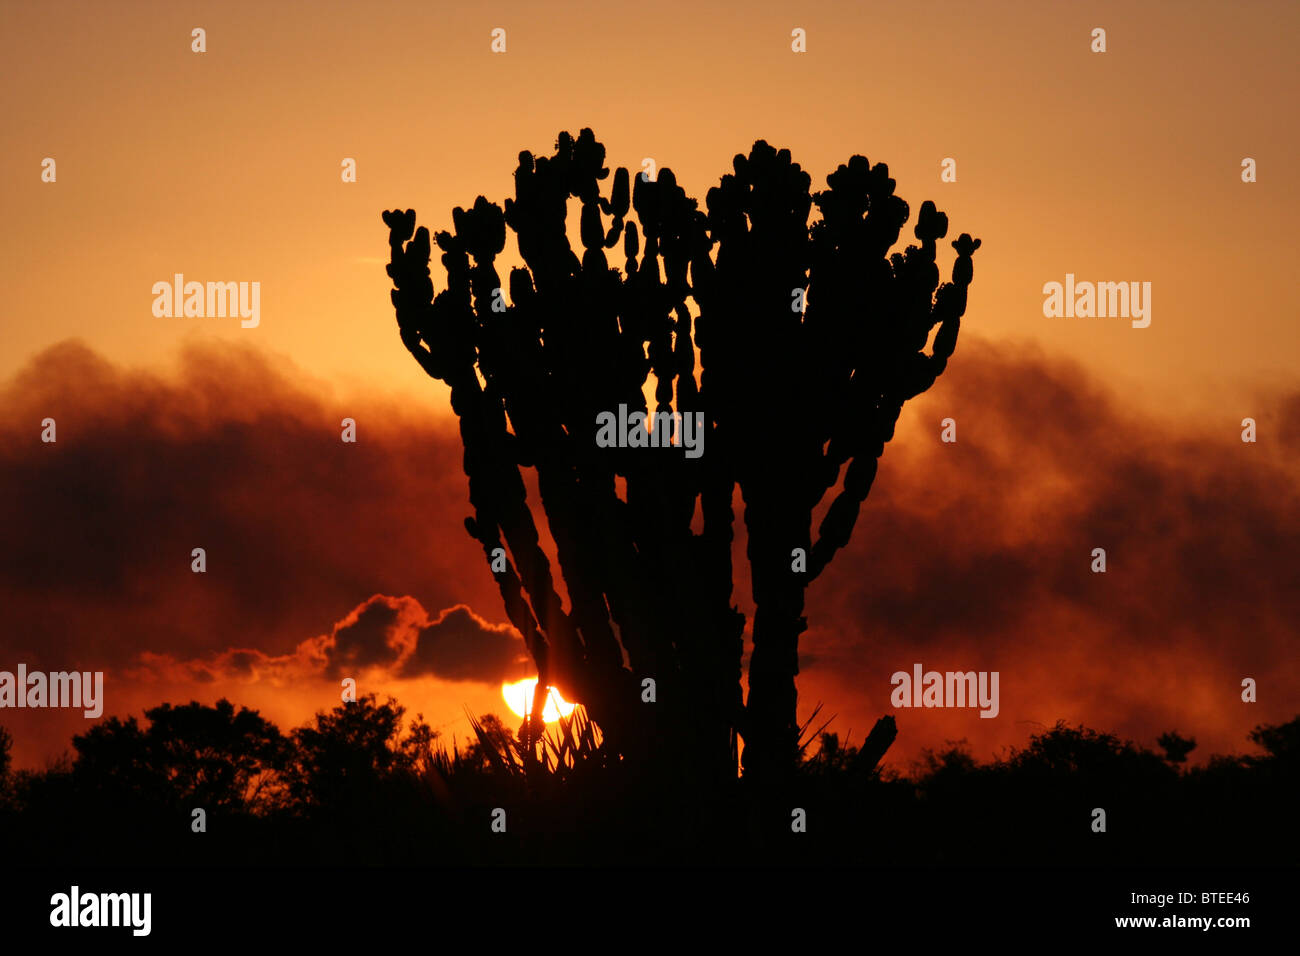 Euphorbia silhouetted at sunset with smoke from bushfire in the background Stock Photo